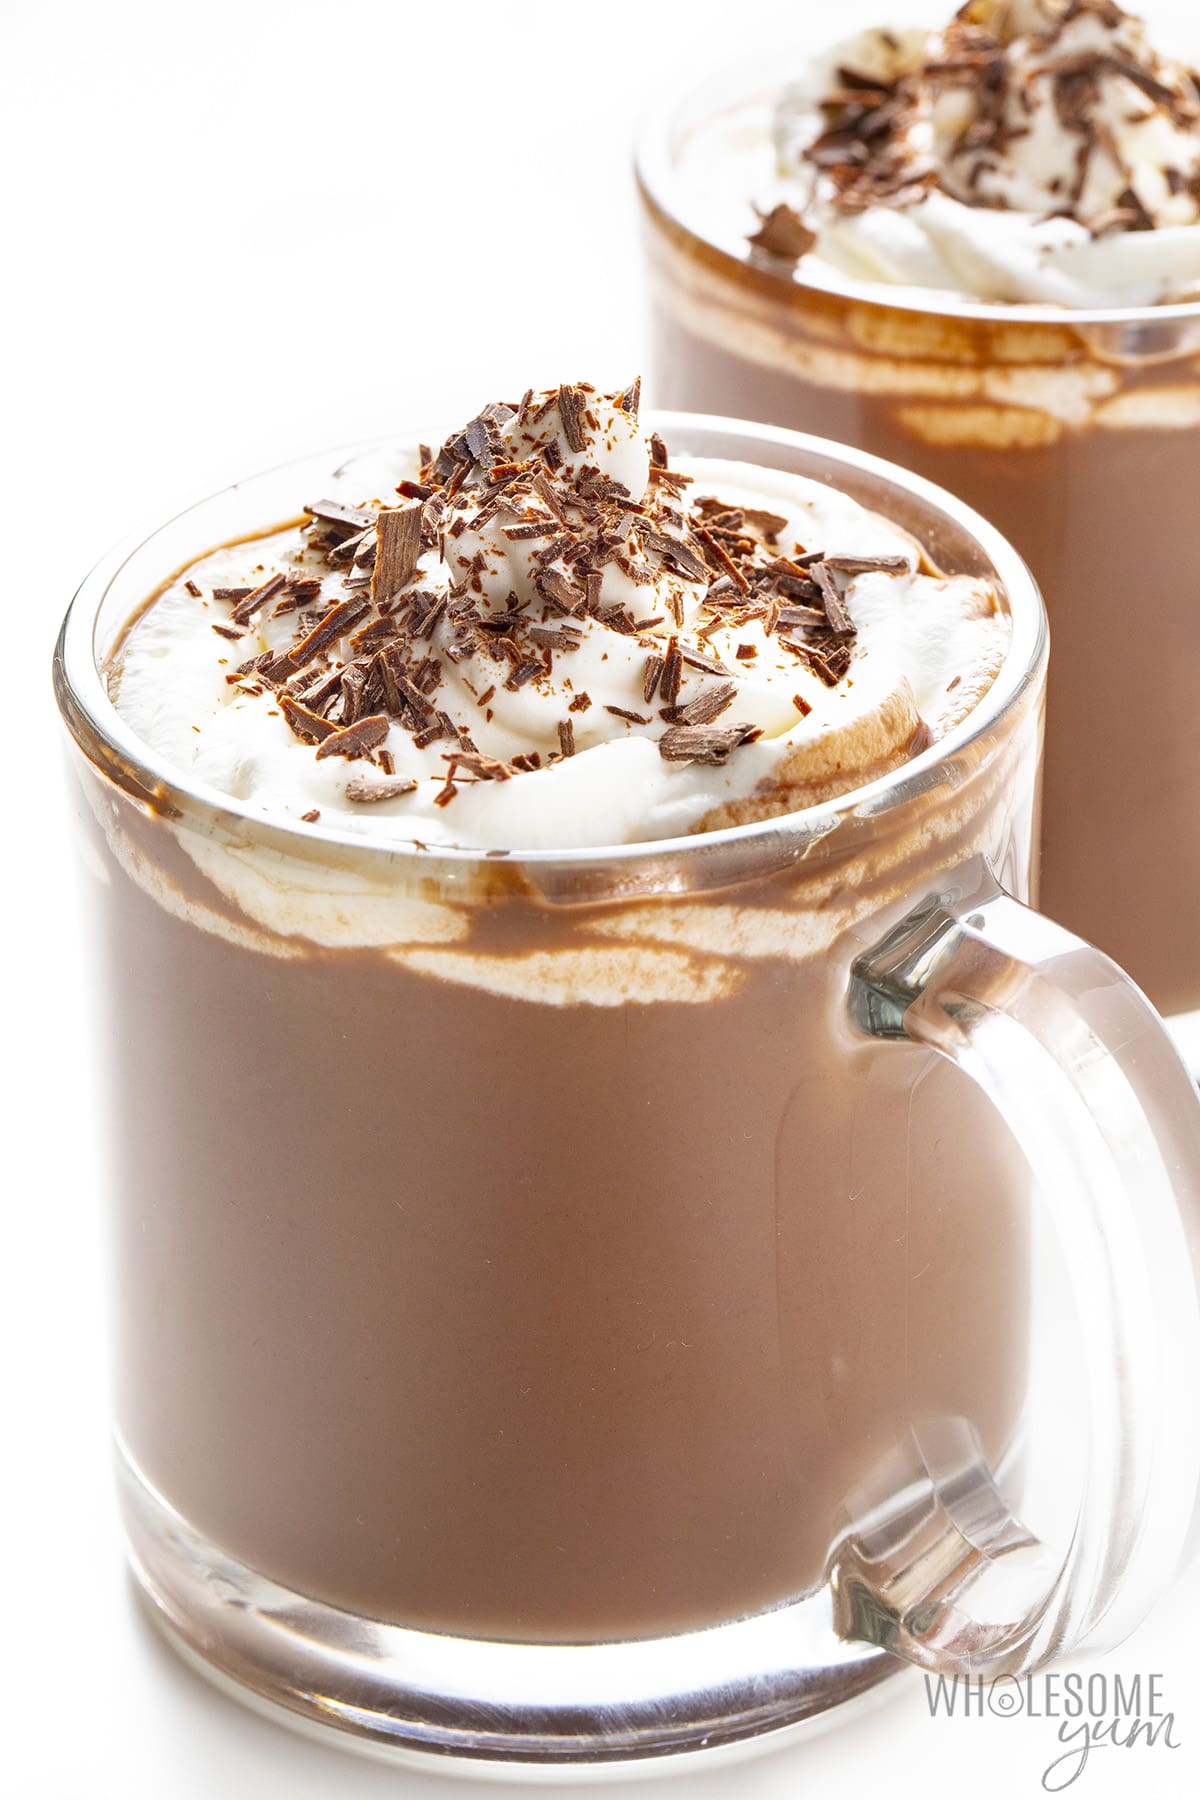 Hot chocolate in 2 mugs with whipped cream and chocolate on top.